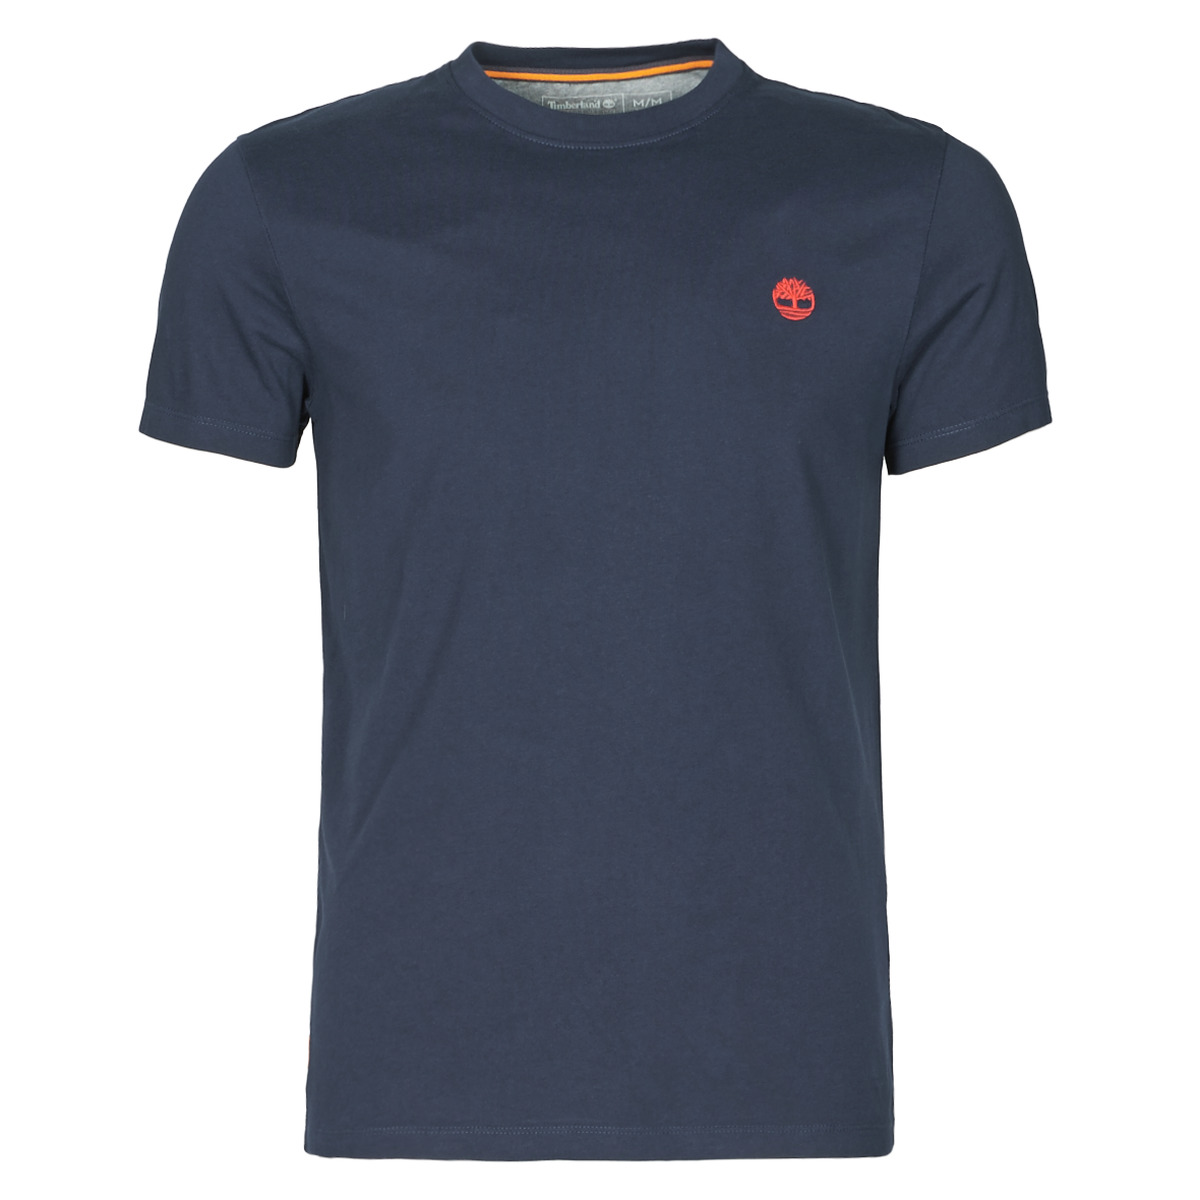 DUNSTAN Spartoo RIVER POCKET Marine t-shirts short-sleeved delivery - ! Timberland Fast € - SLIM Europe 33,00 TEE SS Clothing | Men